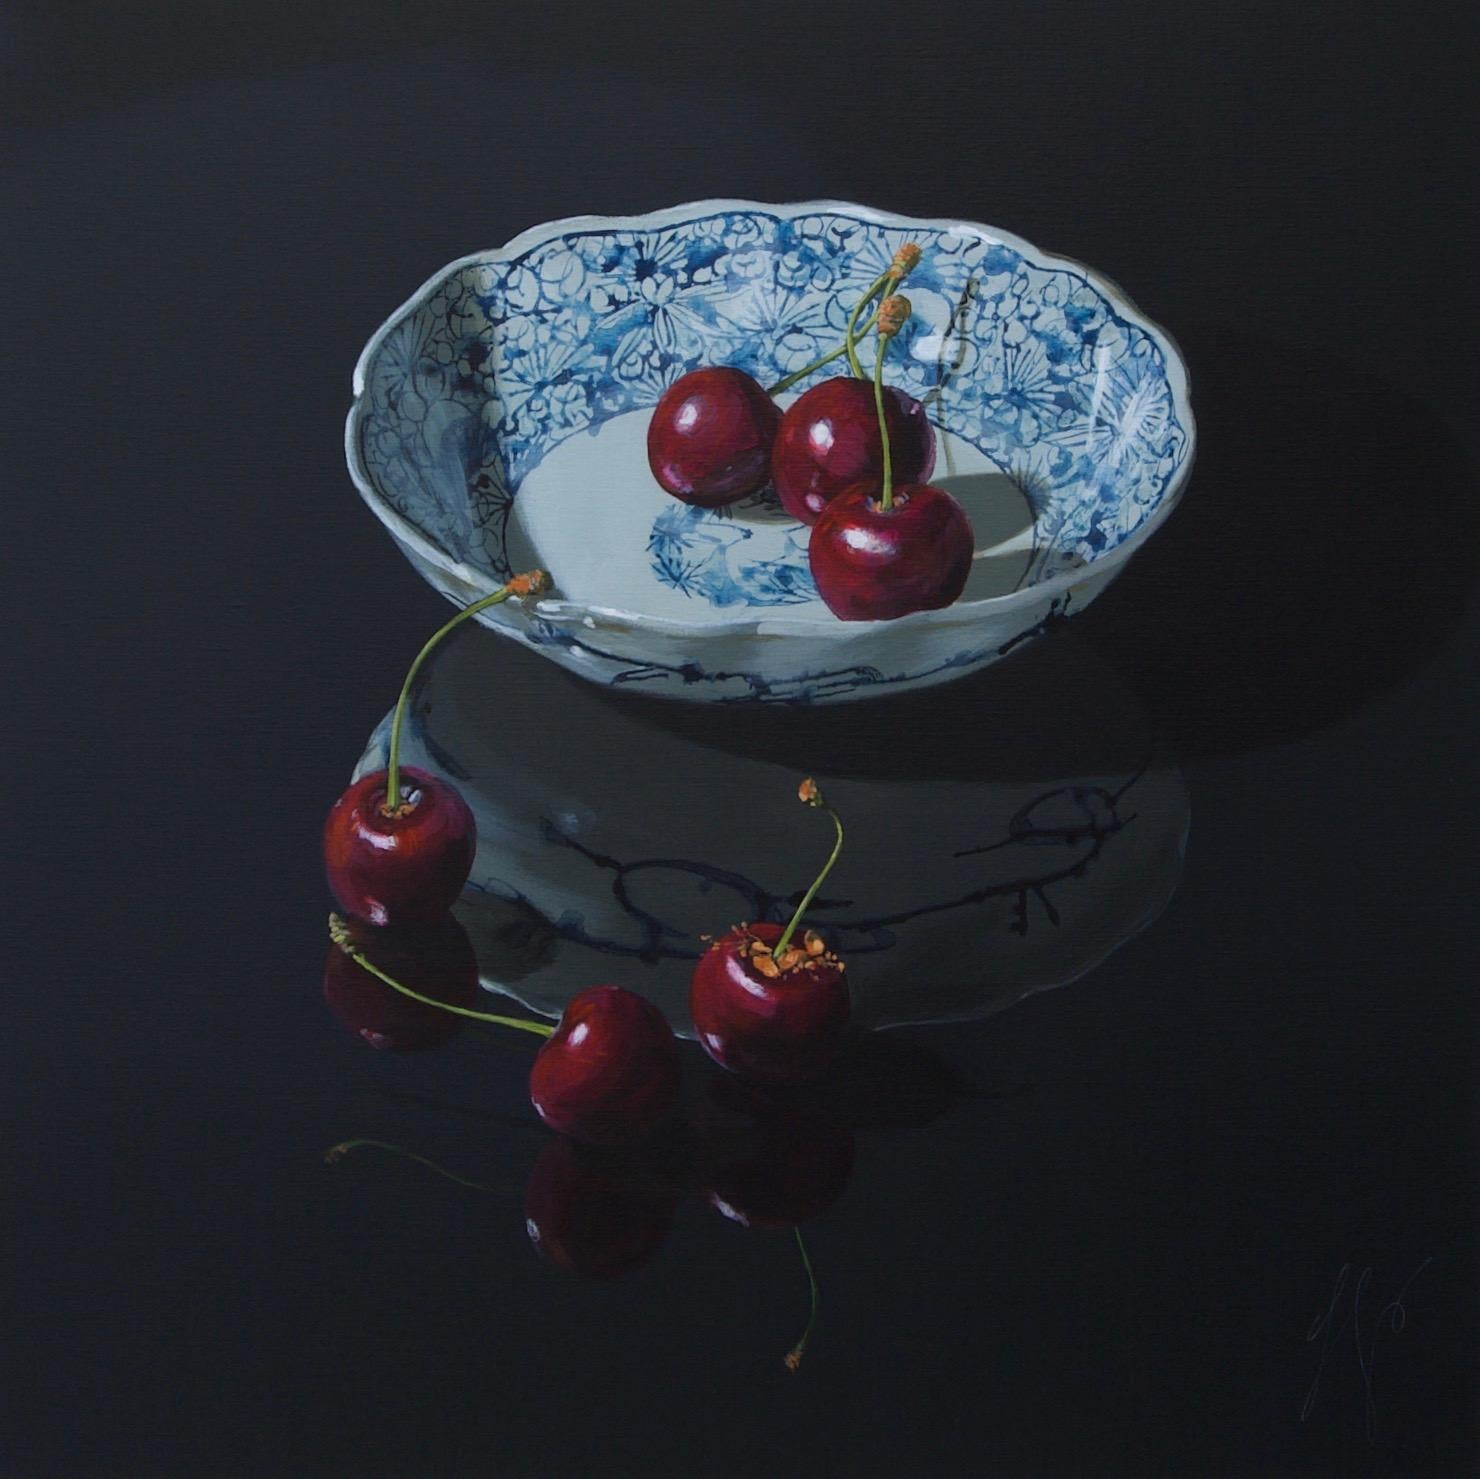 Sasja Wagenaar Figurative Painting - ''Cherries on Black'' Dutch Contemporary Still Life with Porcelain and Fruit